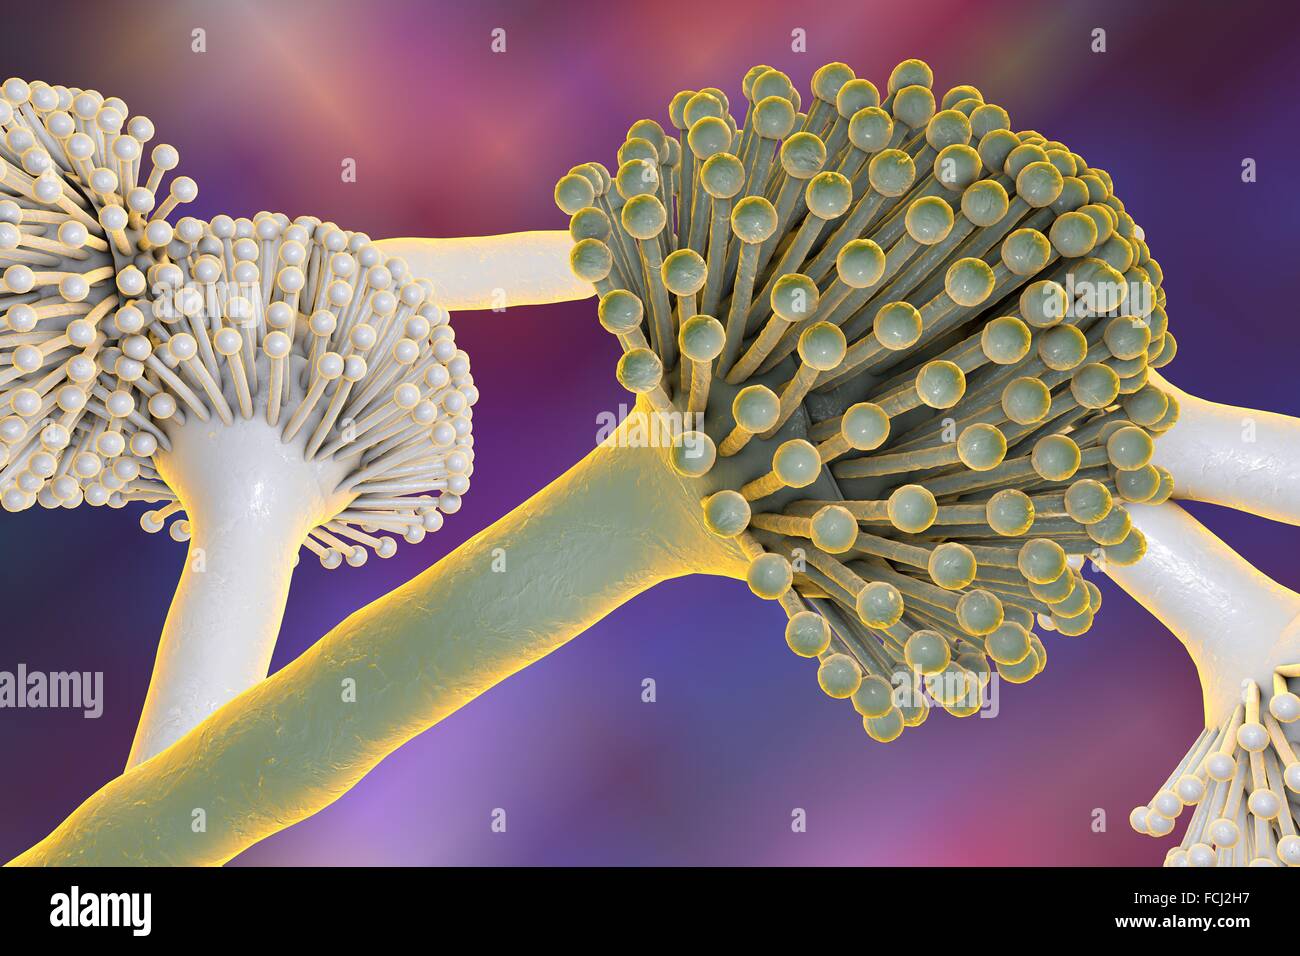 Aspergillus fungus, computer artwork. This is a toxic fungus that causes diseases in humans. These include fungal ear, lung and skin infections (otomycosis and pulmonary aspergillosis, and mycotic keratitis). It also produces aflatoxin, one of the most po Stock Photo